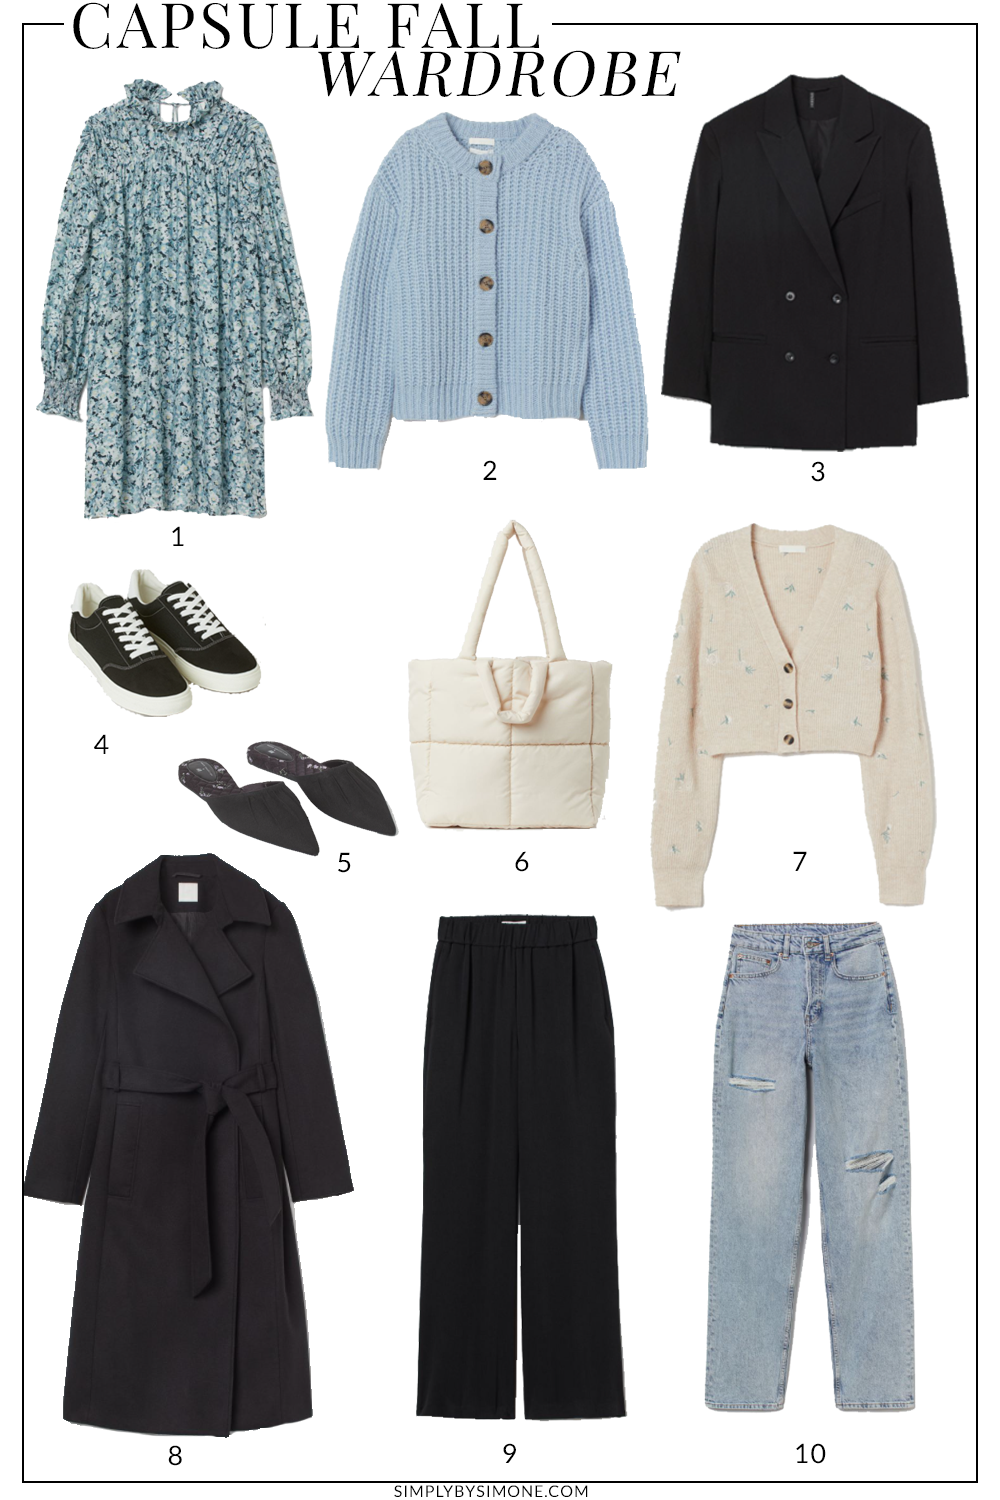 How to Build a SIMPLE Capsule Wardrobe in 5 Easy Steps